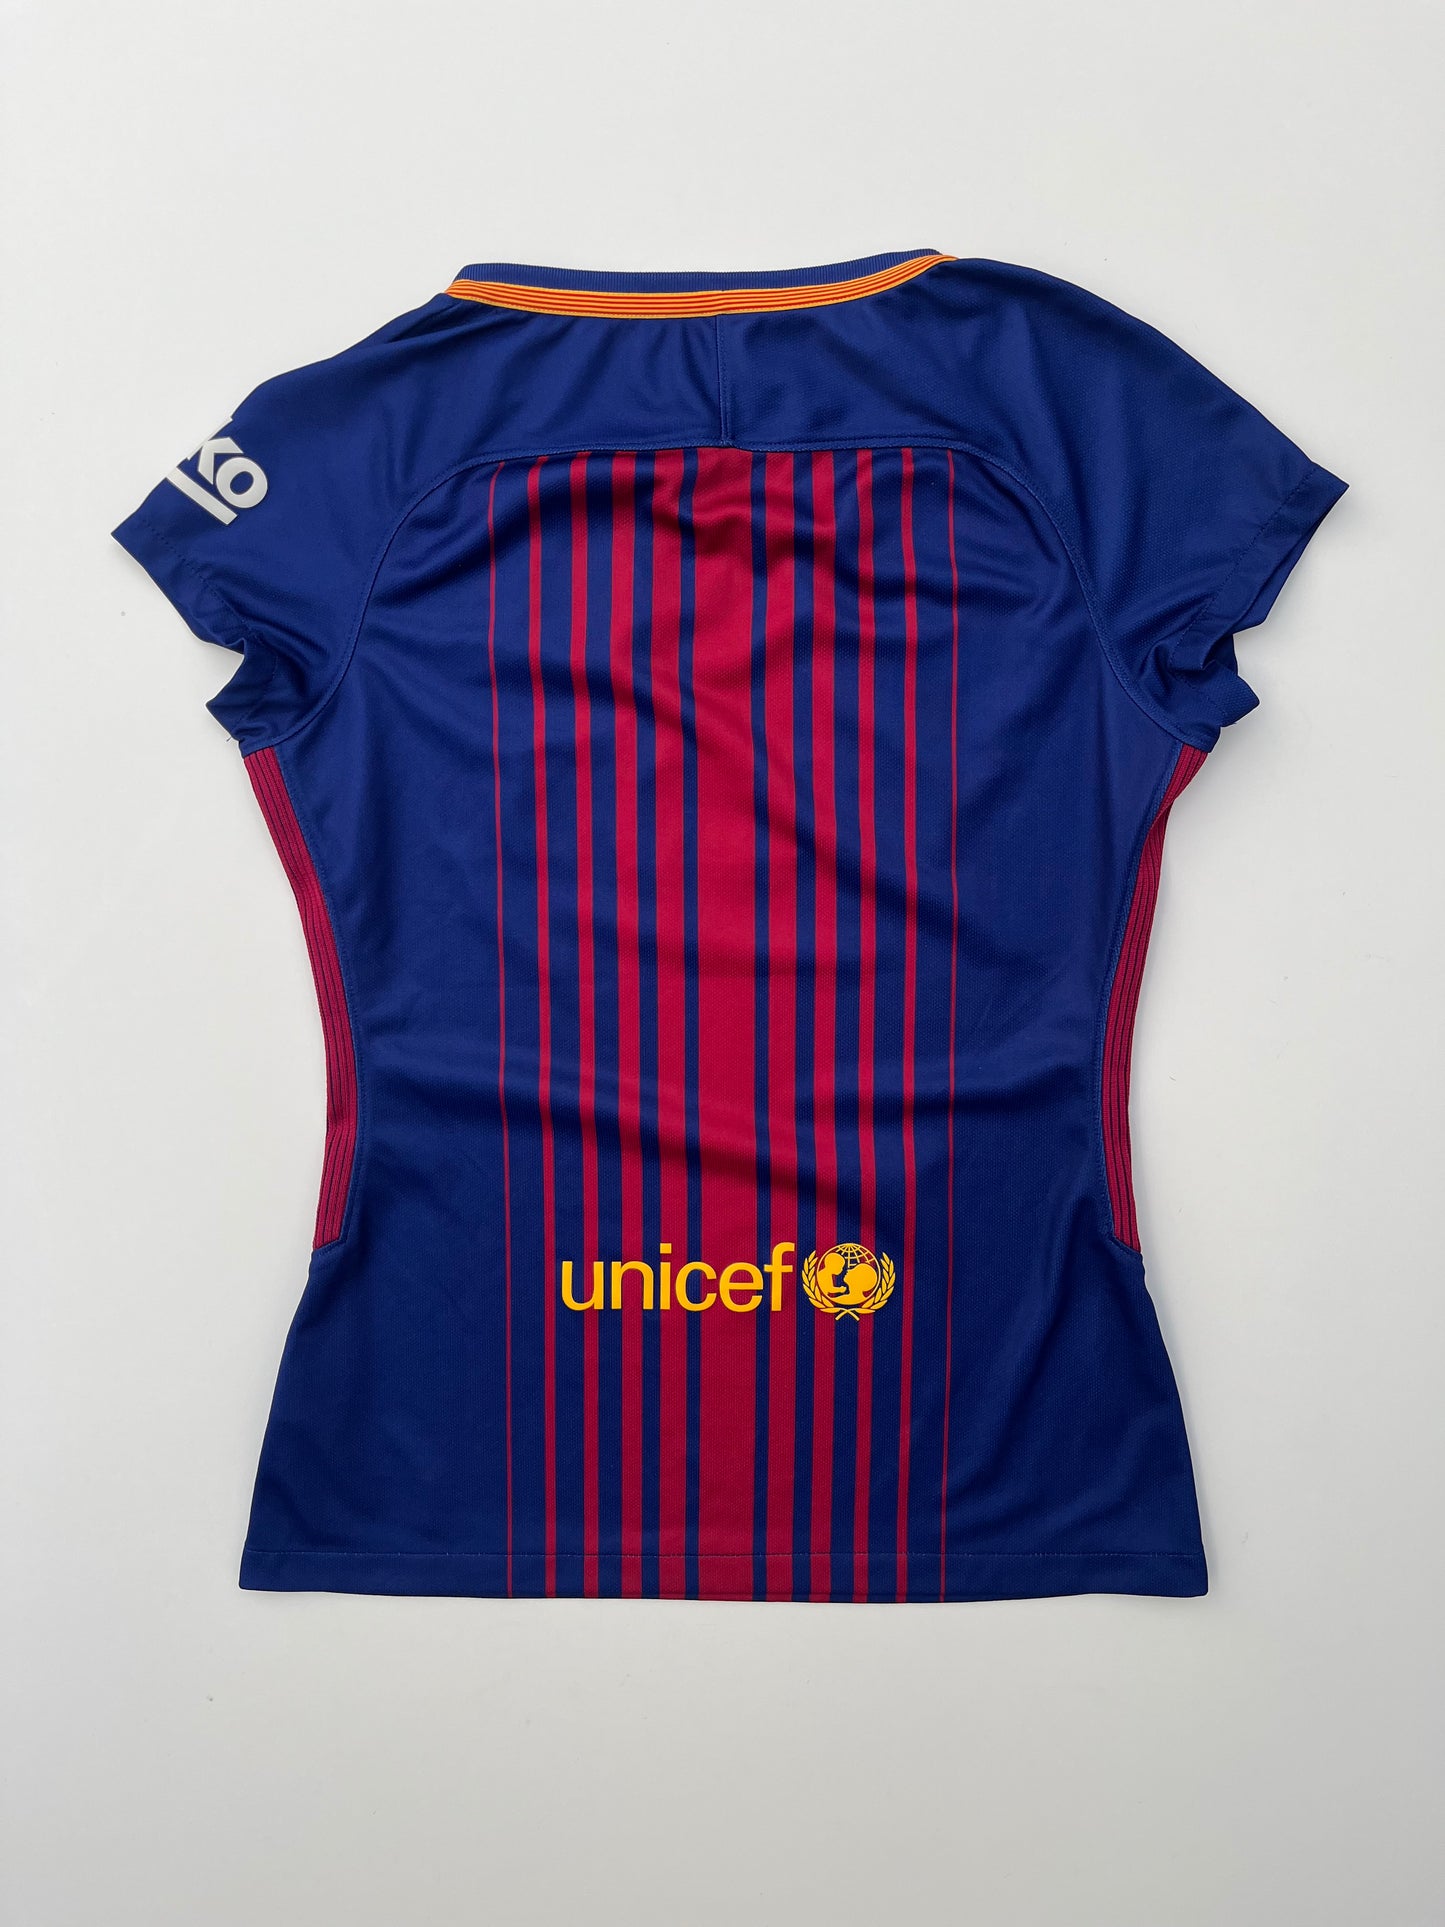 Jersey Barcelona Local 2017 2018 (S mujer)